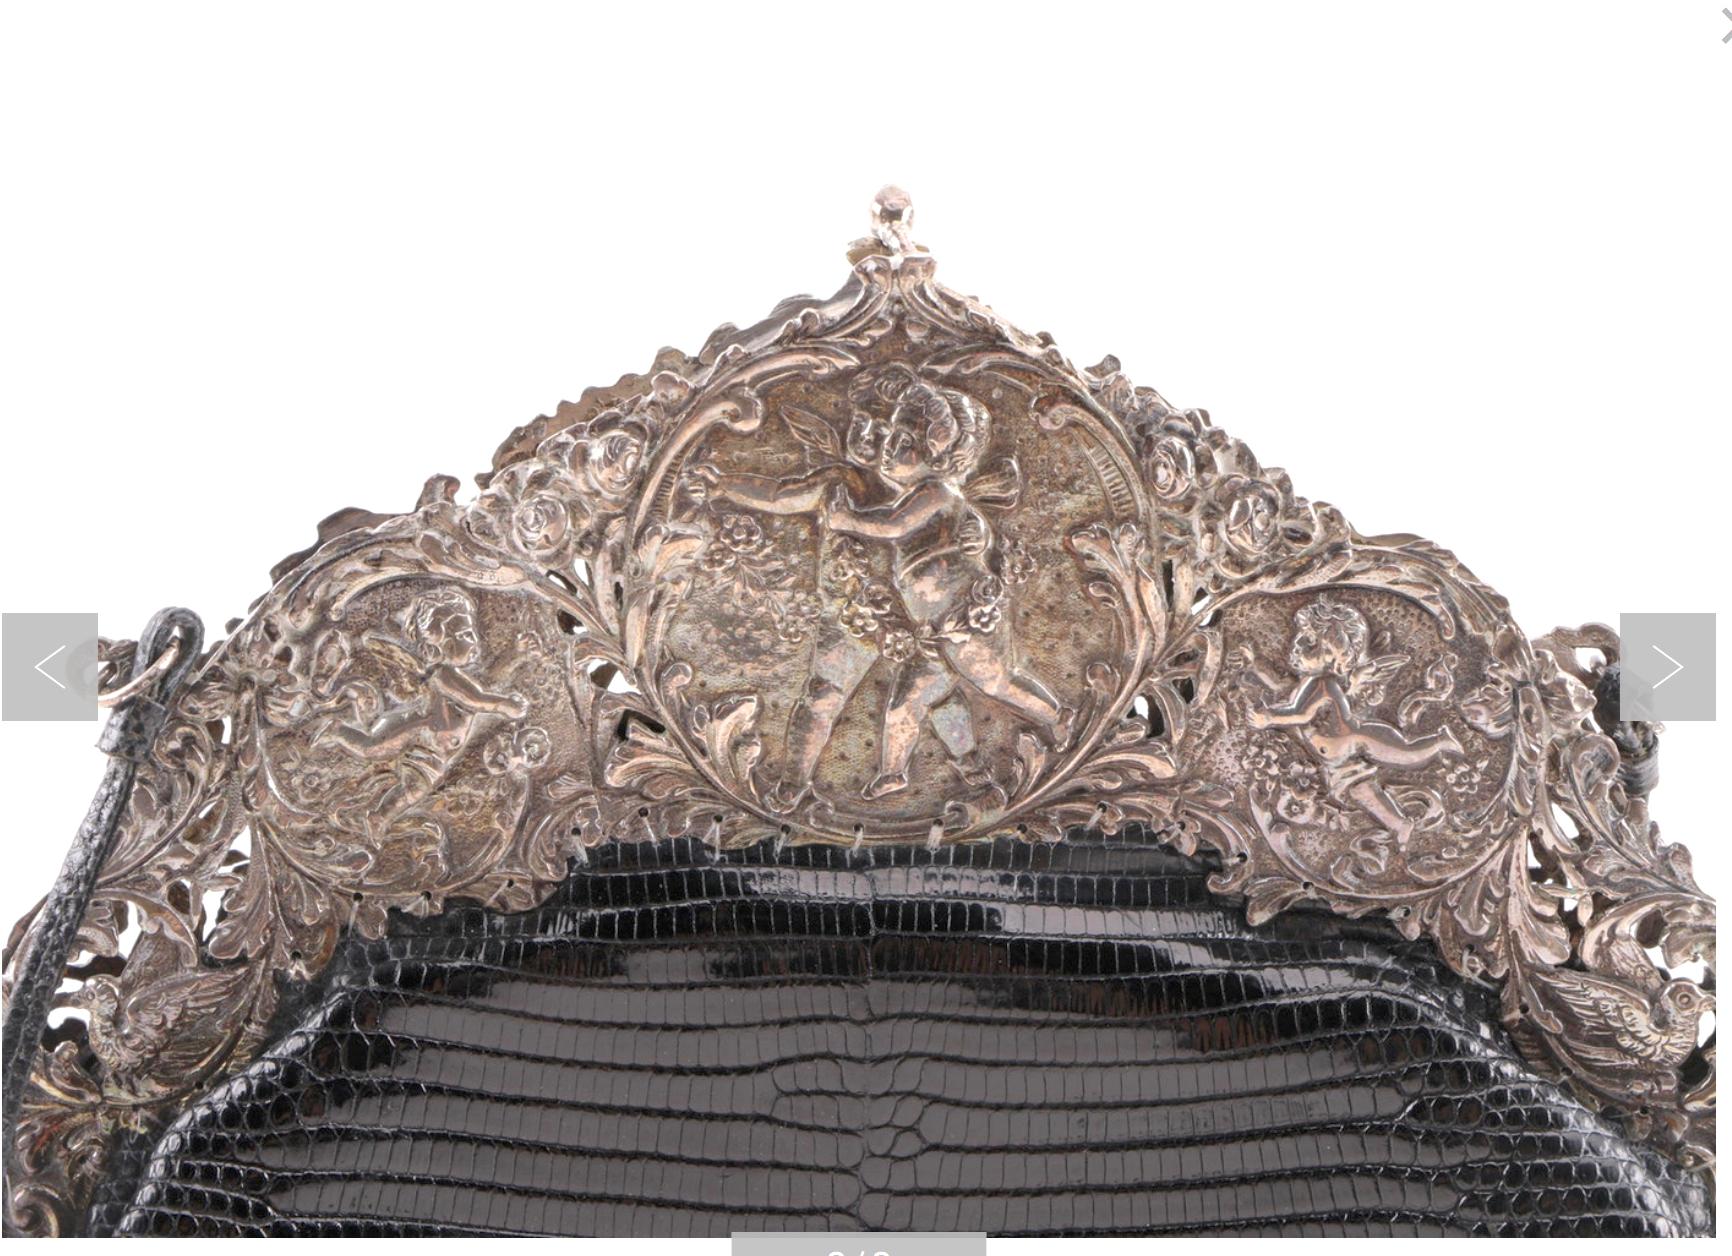 For a Fashionista-an Inspired Chic Sterling Silver 800 circa 1910 Handbag European Frame with an added 1980s Black Lizard Leather Evening Bag.
The gorgeous arched frame has a Baroque style openwork design featuring multiple putti and scroll work